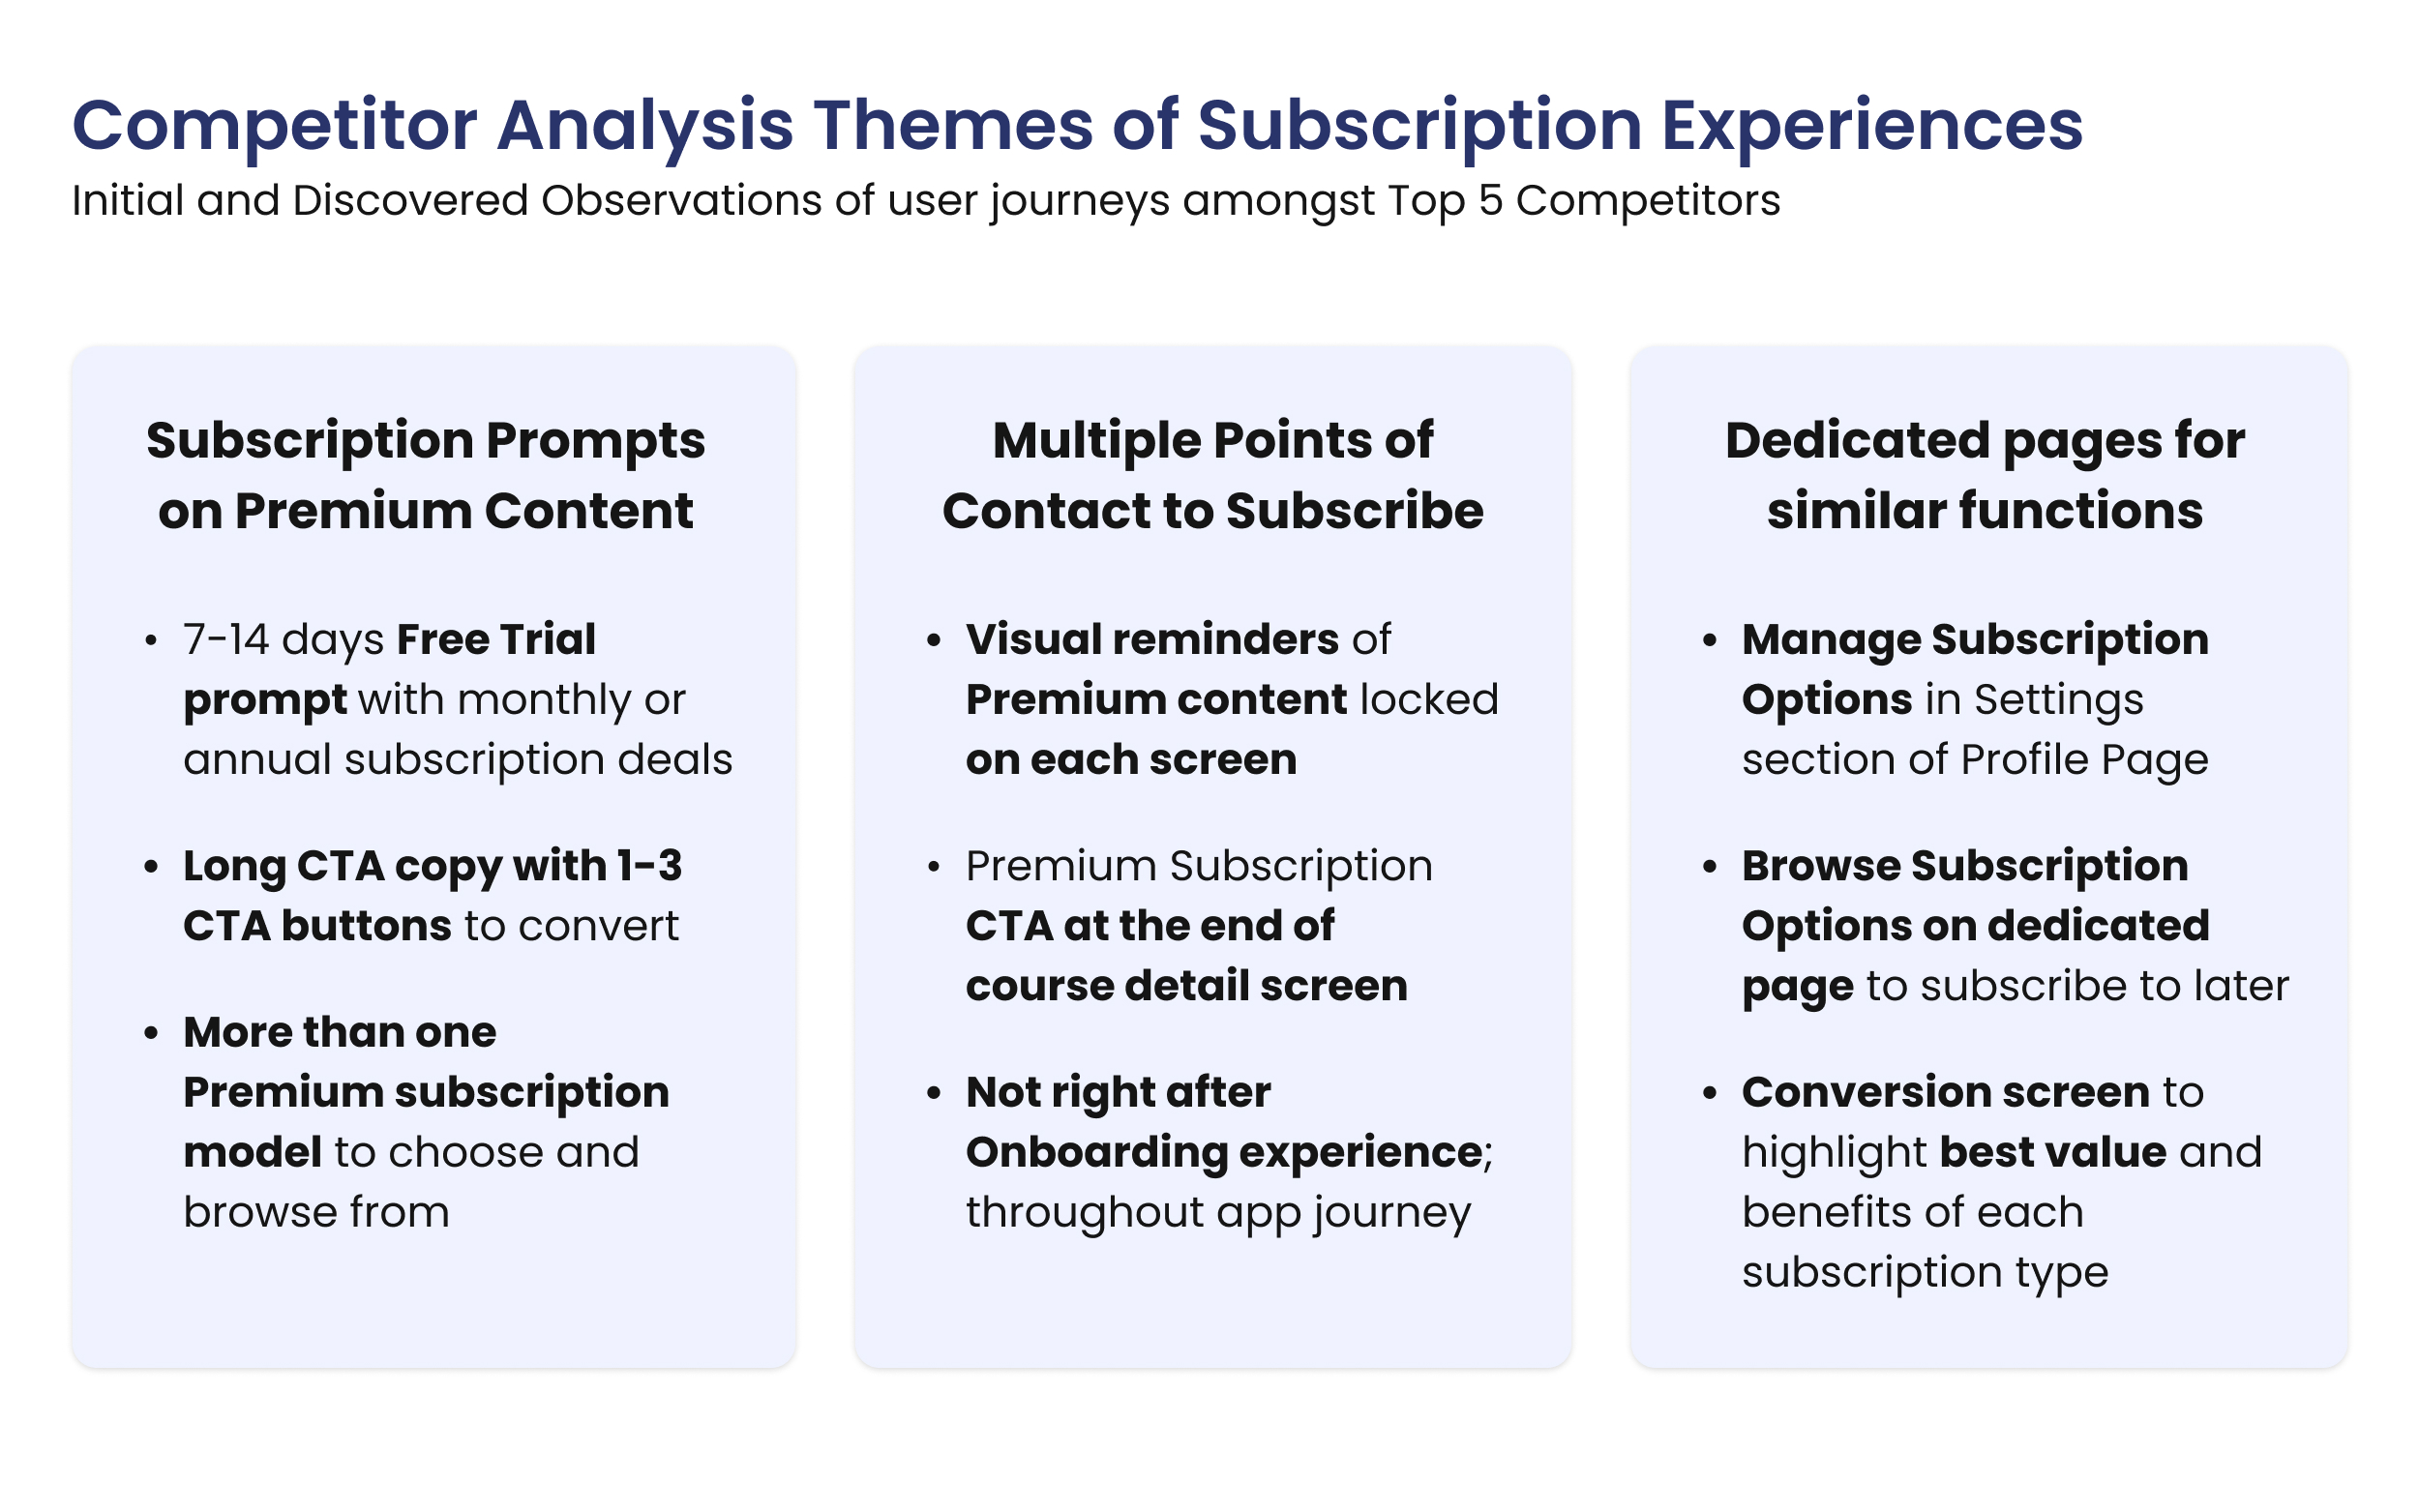 hree lists supporting three central themes of the subscription experiences from the Top 5 Competitors